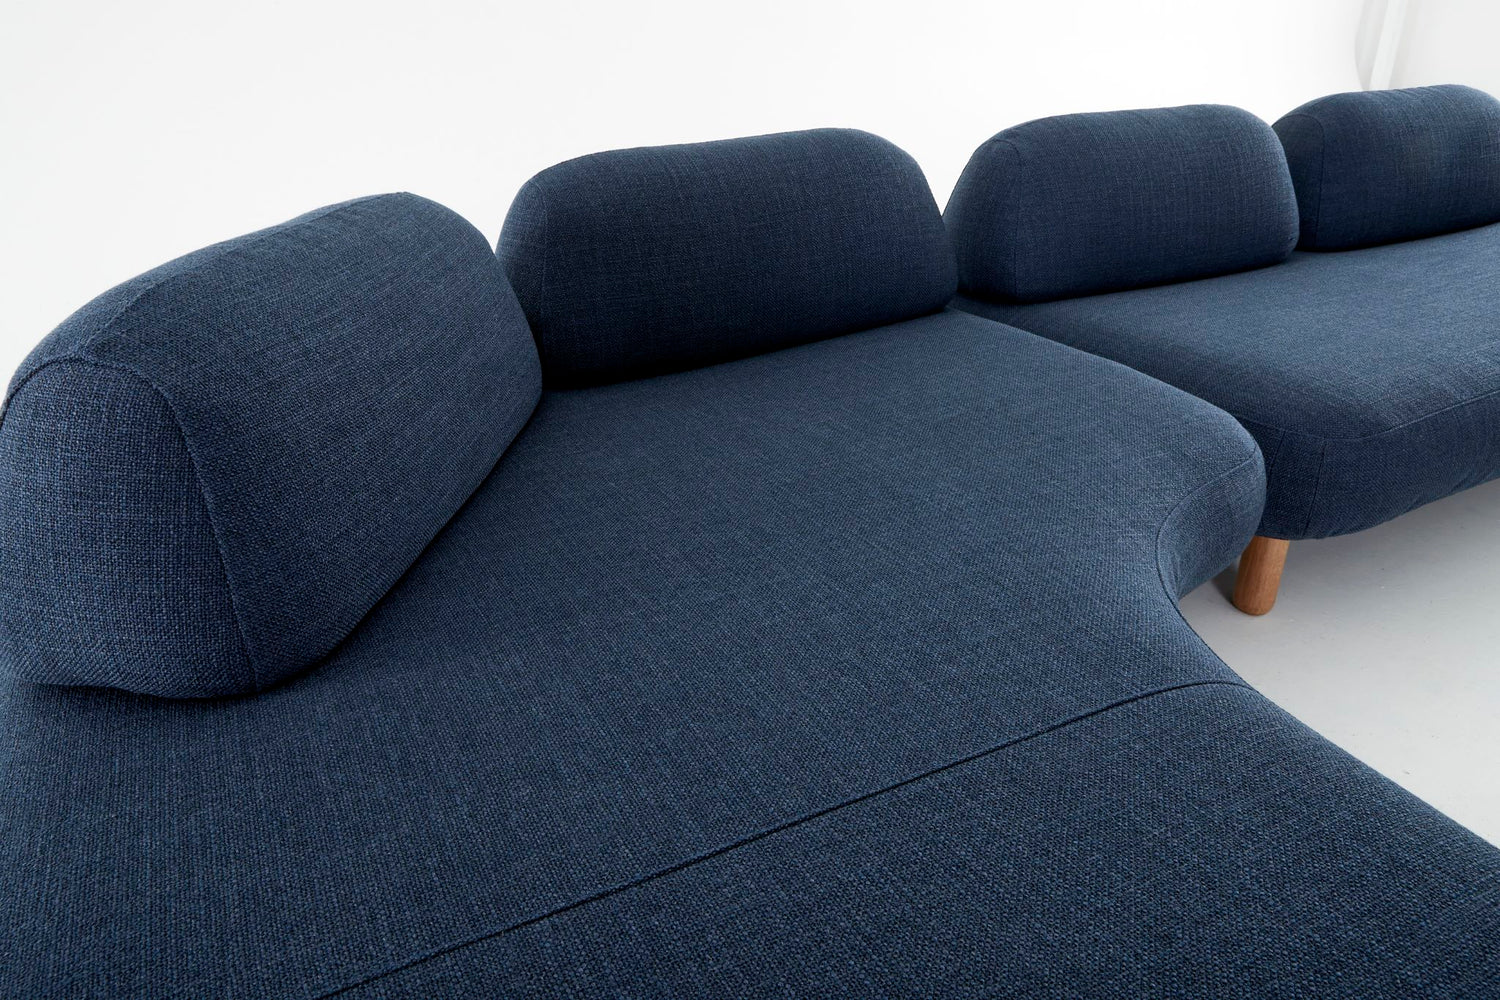 Ethos Max modular sofa in blue showing a sweeping 90 degree curved module.